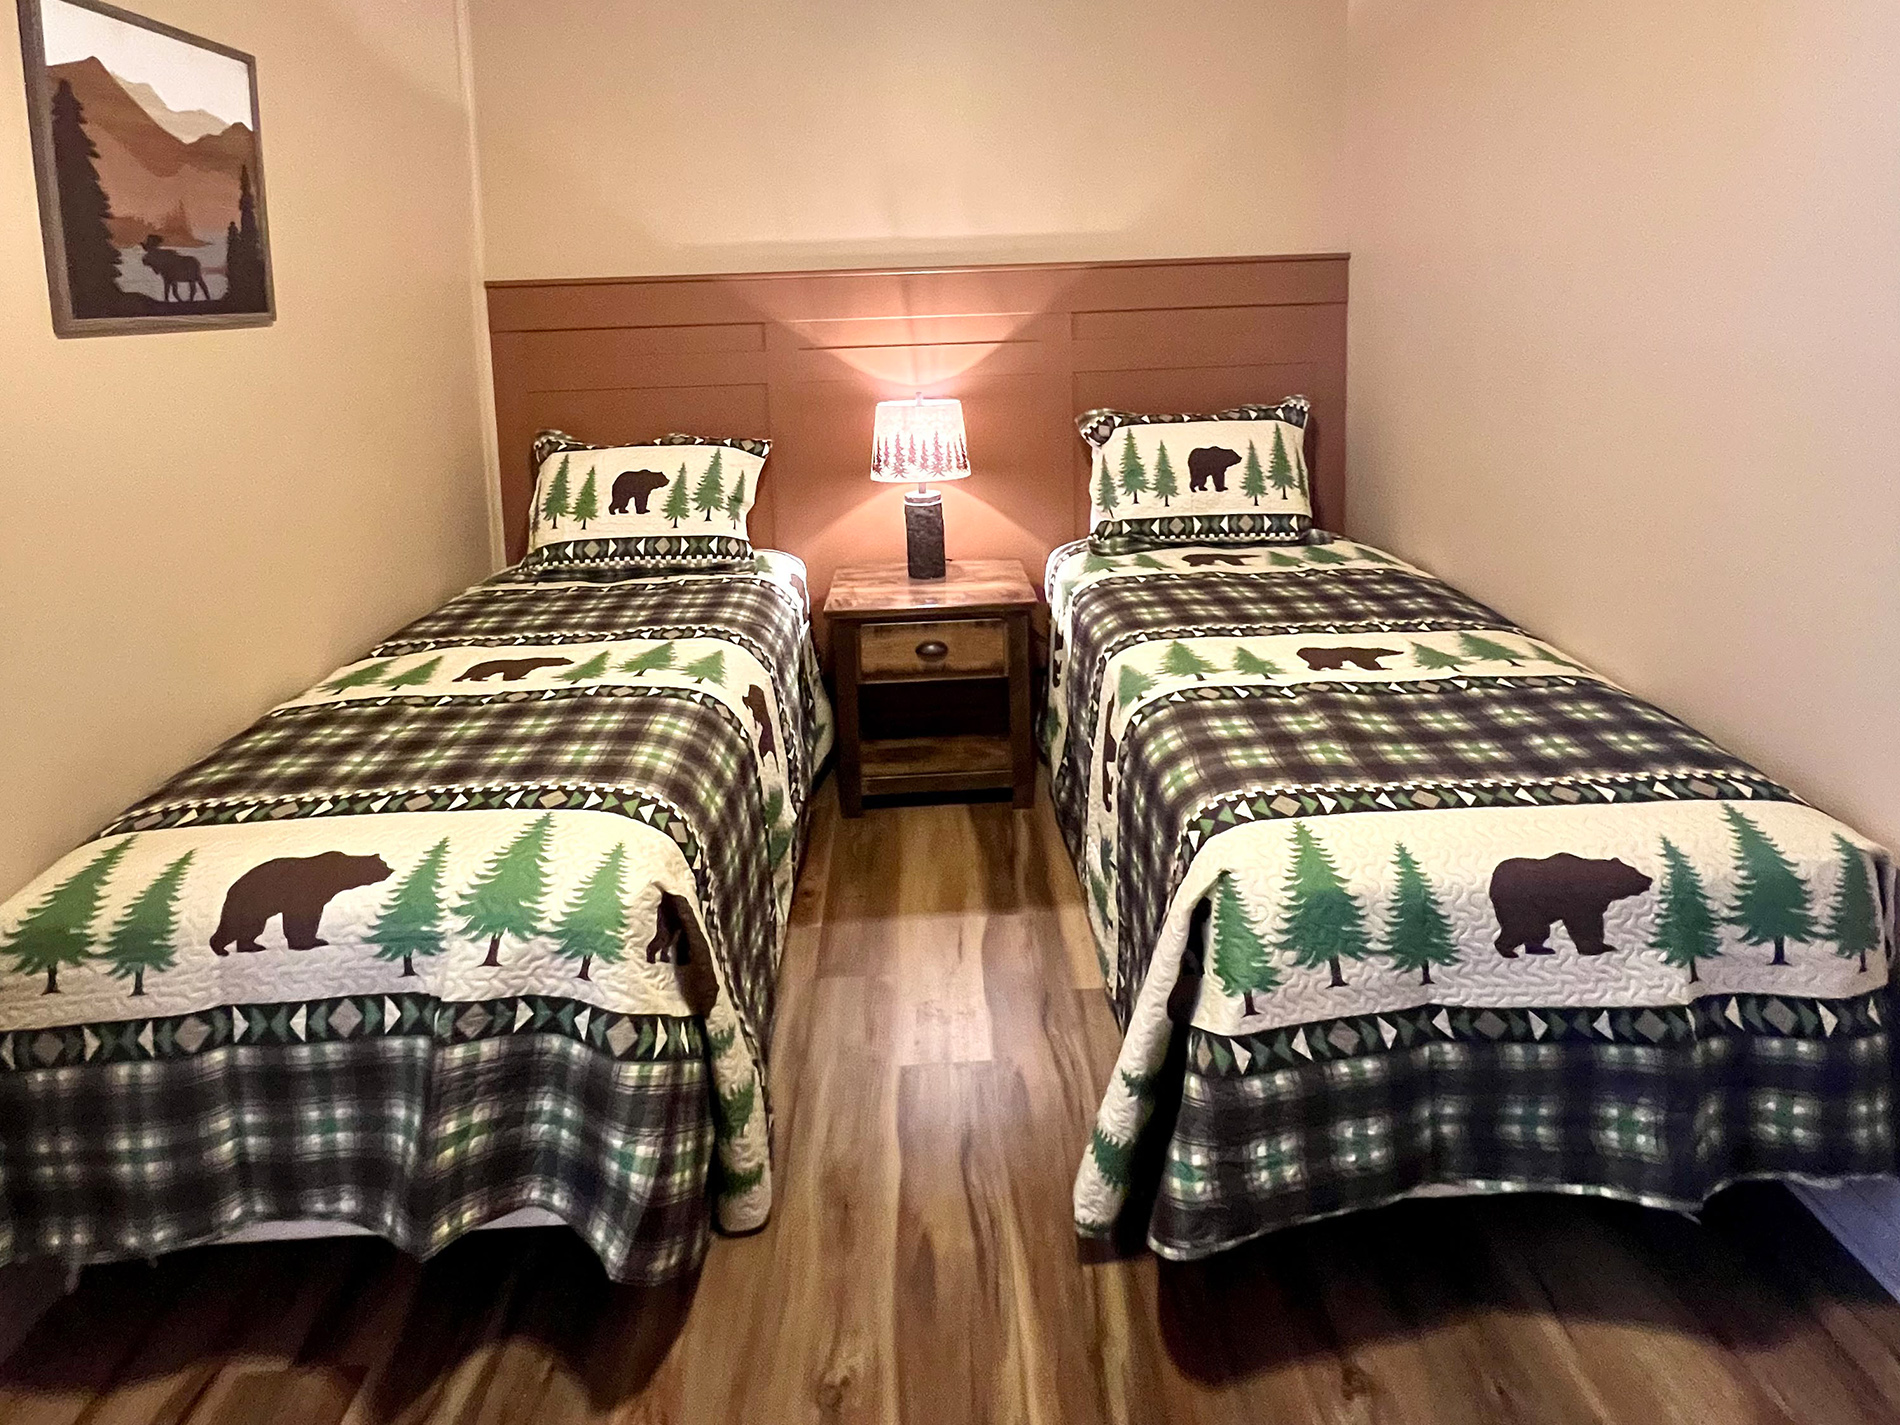 Two single beds with Adirondack bedspreads